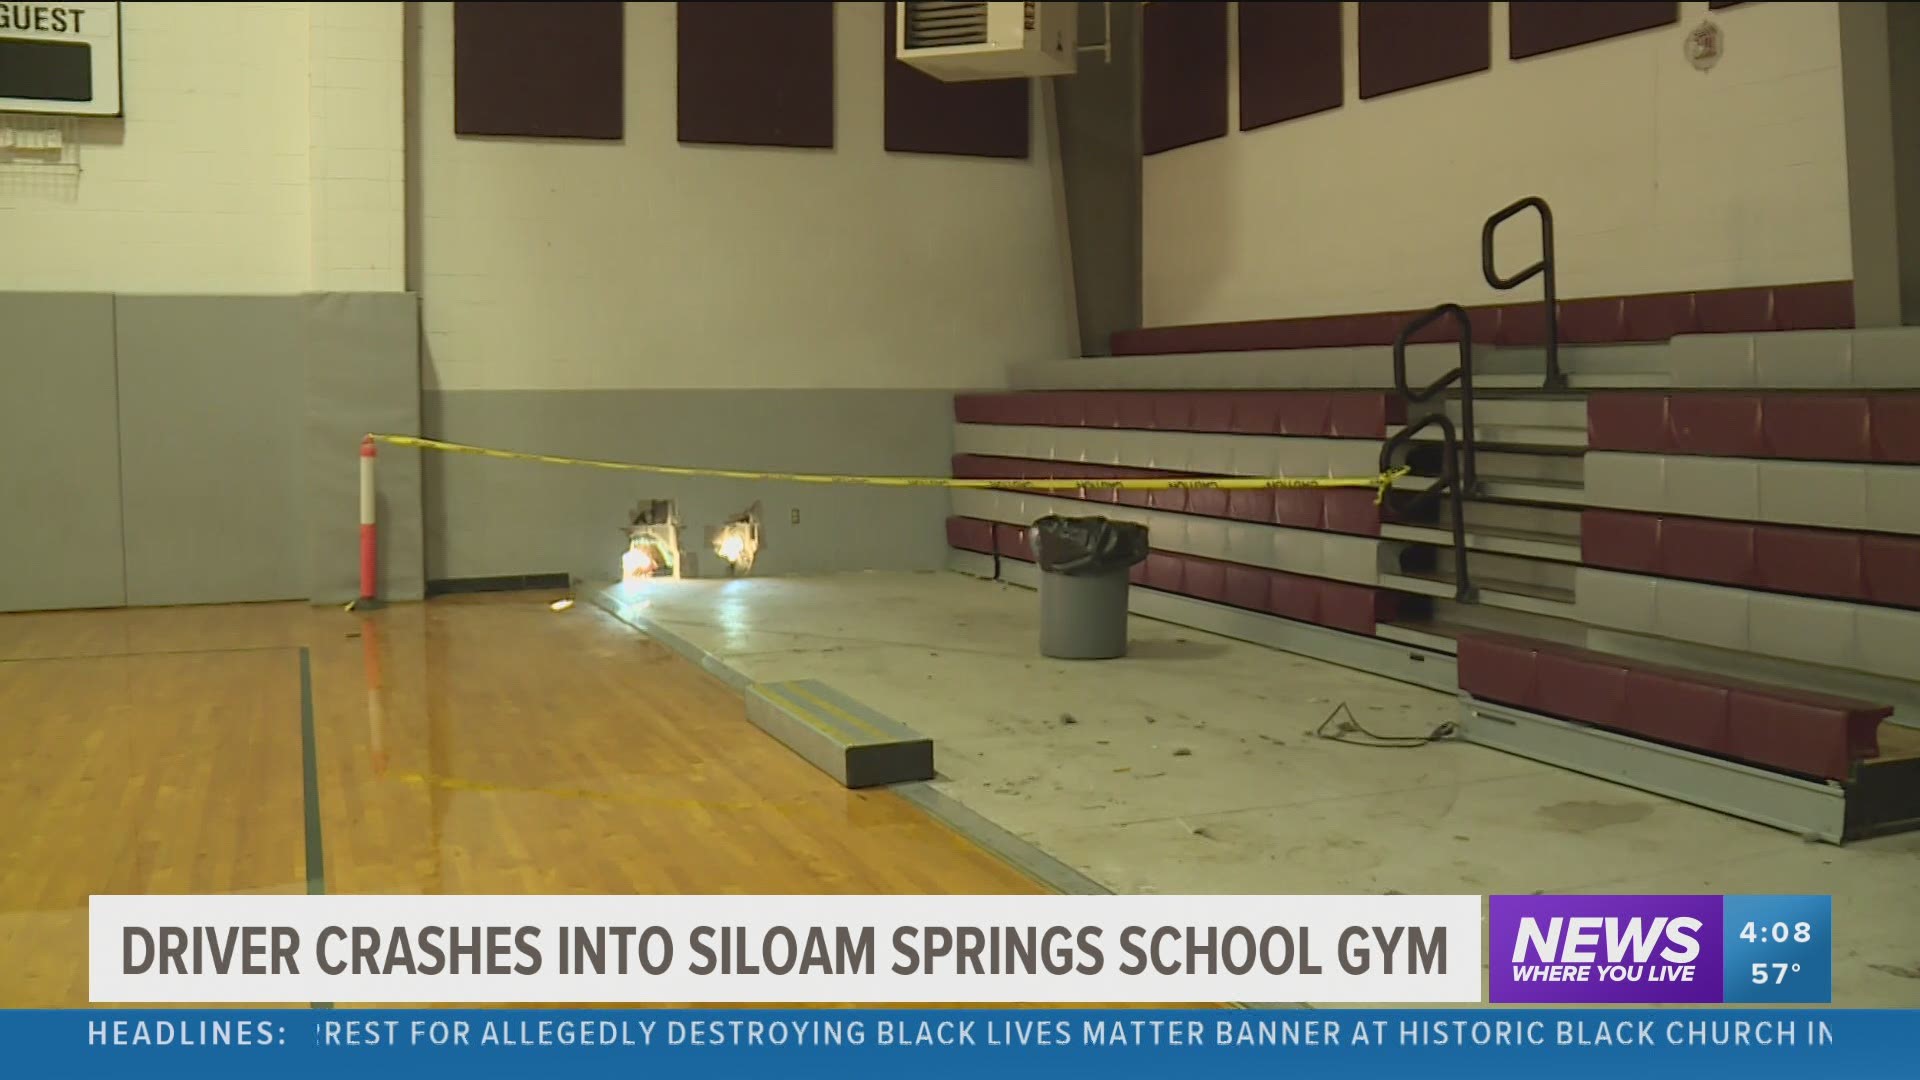 At around 3:30 a.m. Tuesday morning, a truck ran off the road and into the Siloam Springs Intermediate School gym. https://bit.ly/3ohSQat